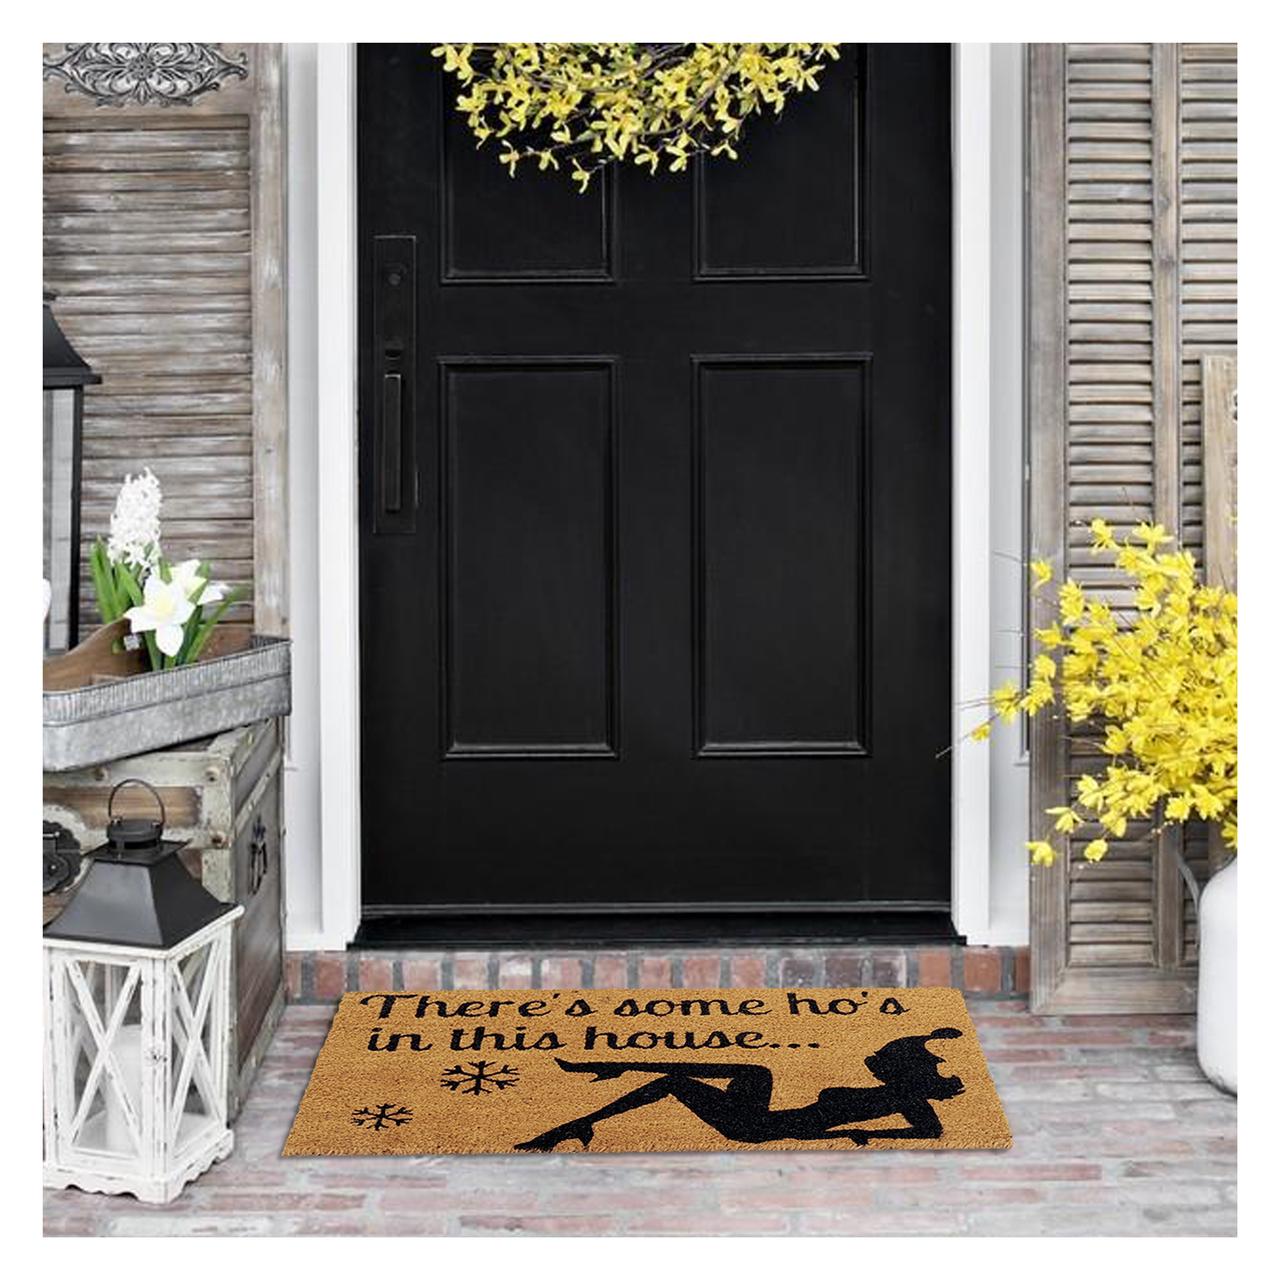 Ho's In This House - Funny Christmas Doormat